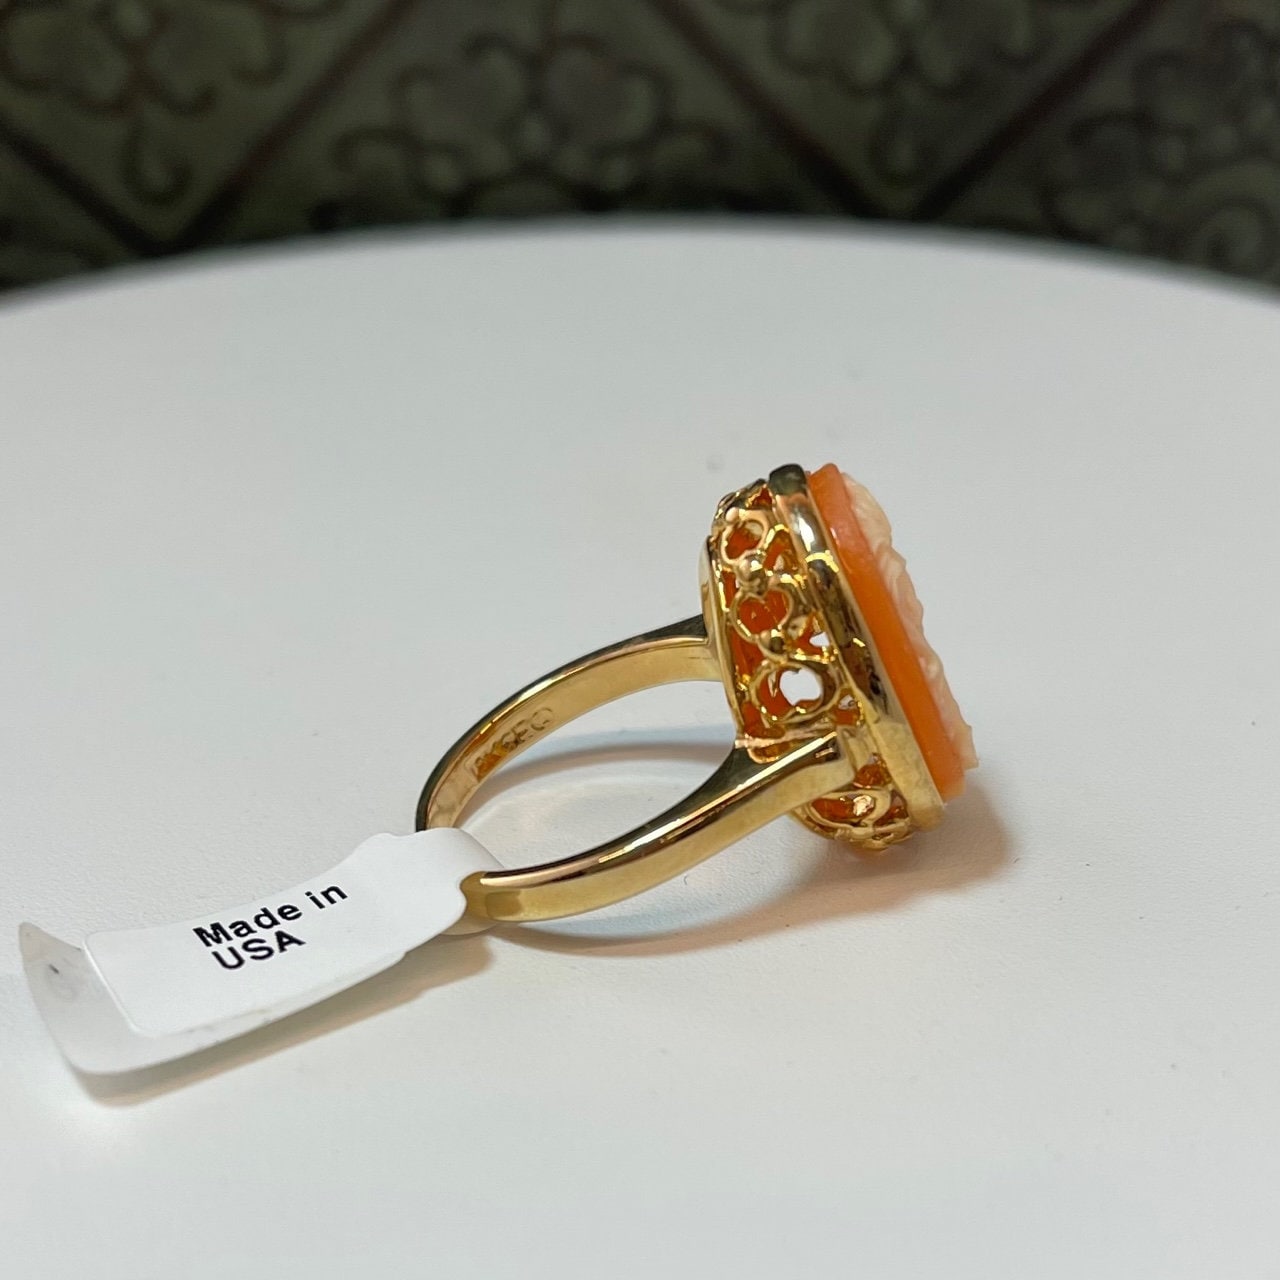 Vintage Ring White Silhouette on Coral Cameo Ring 18k Gold Womans Jewelry Handmade Ring R1776 - Limited Stock - Never Worn  Antique